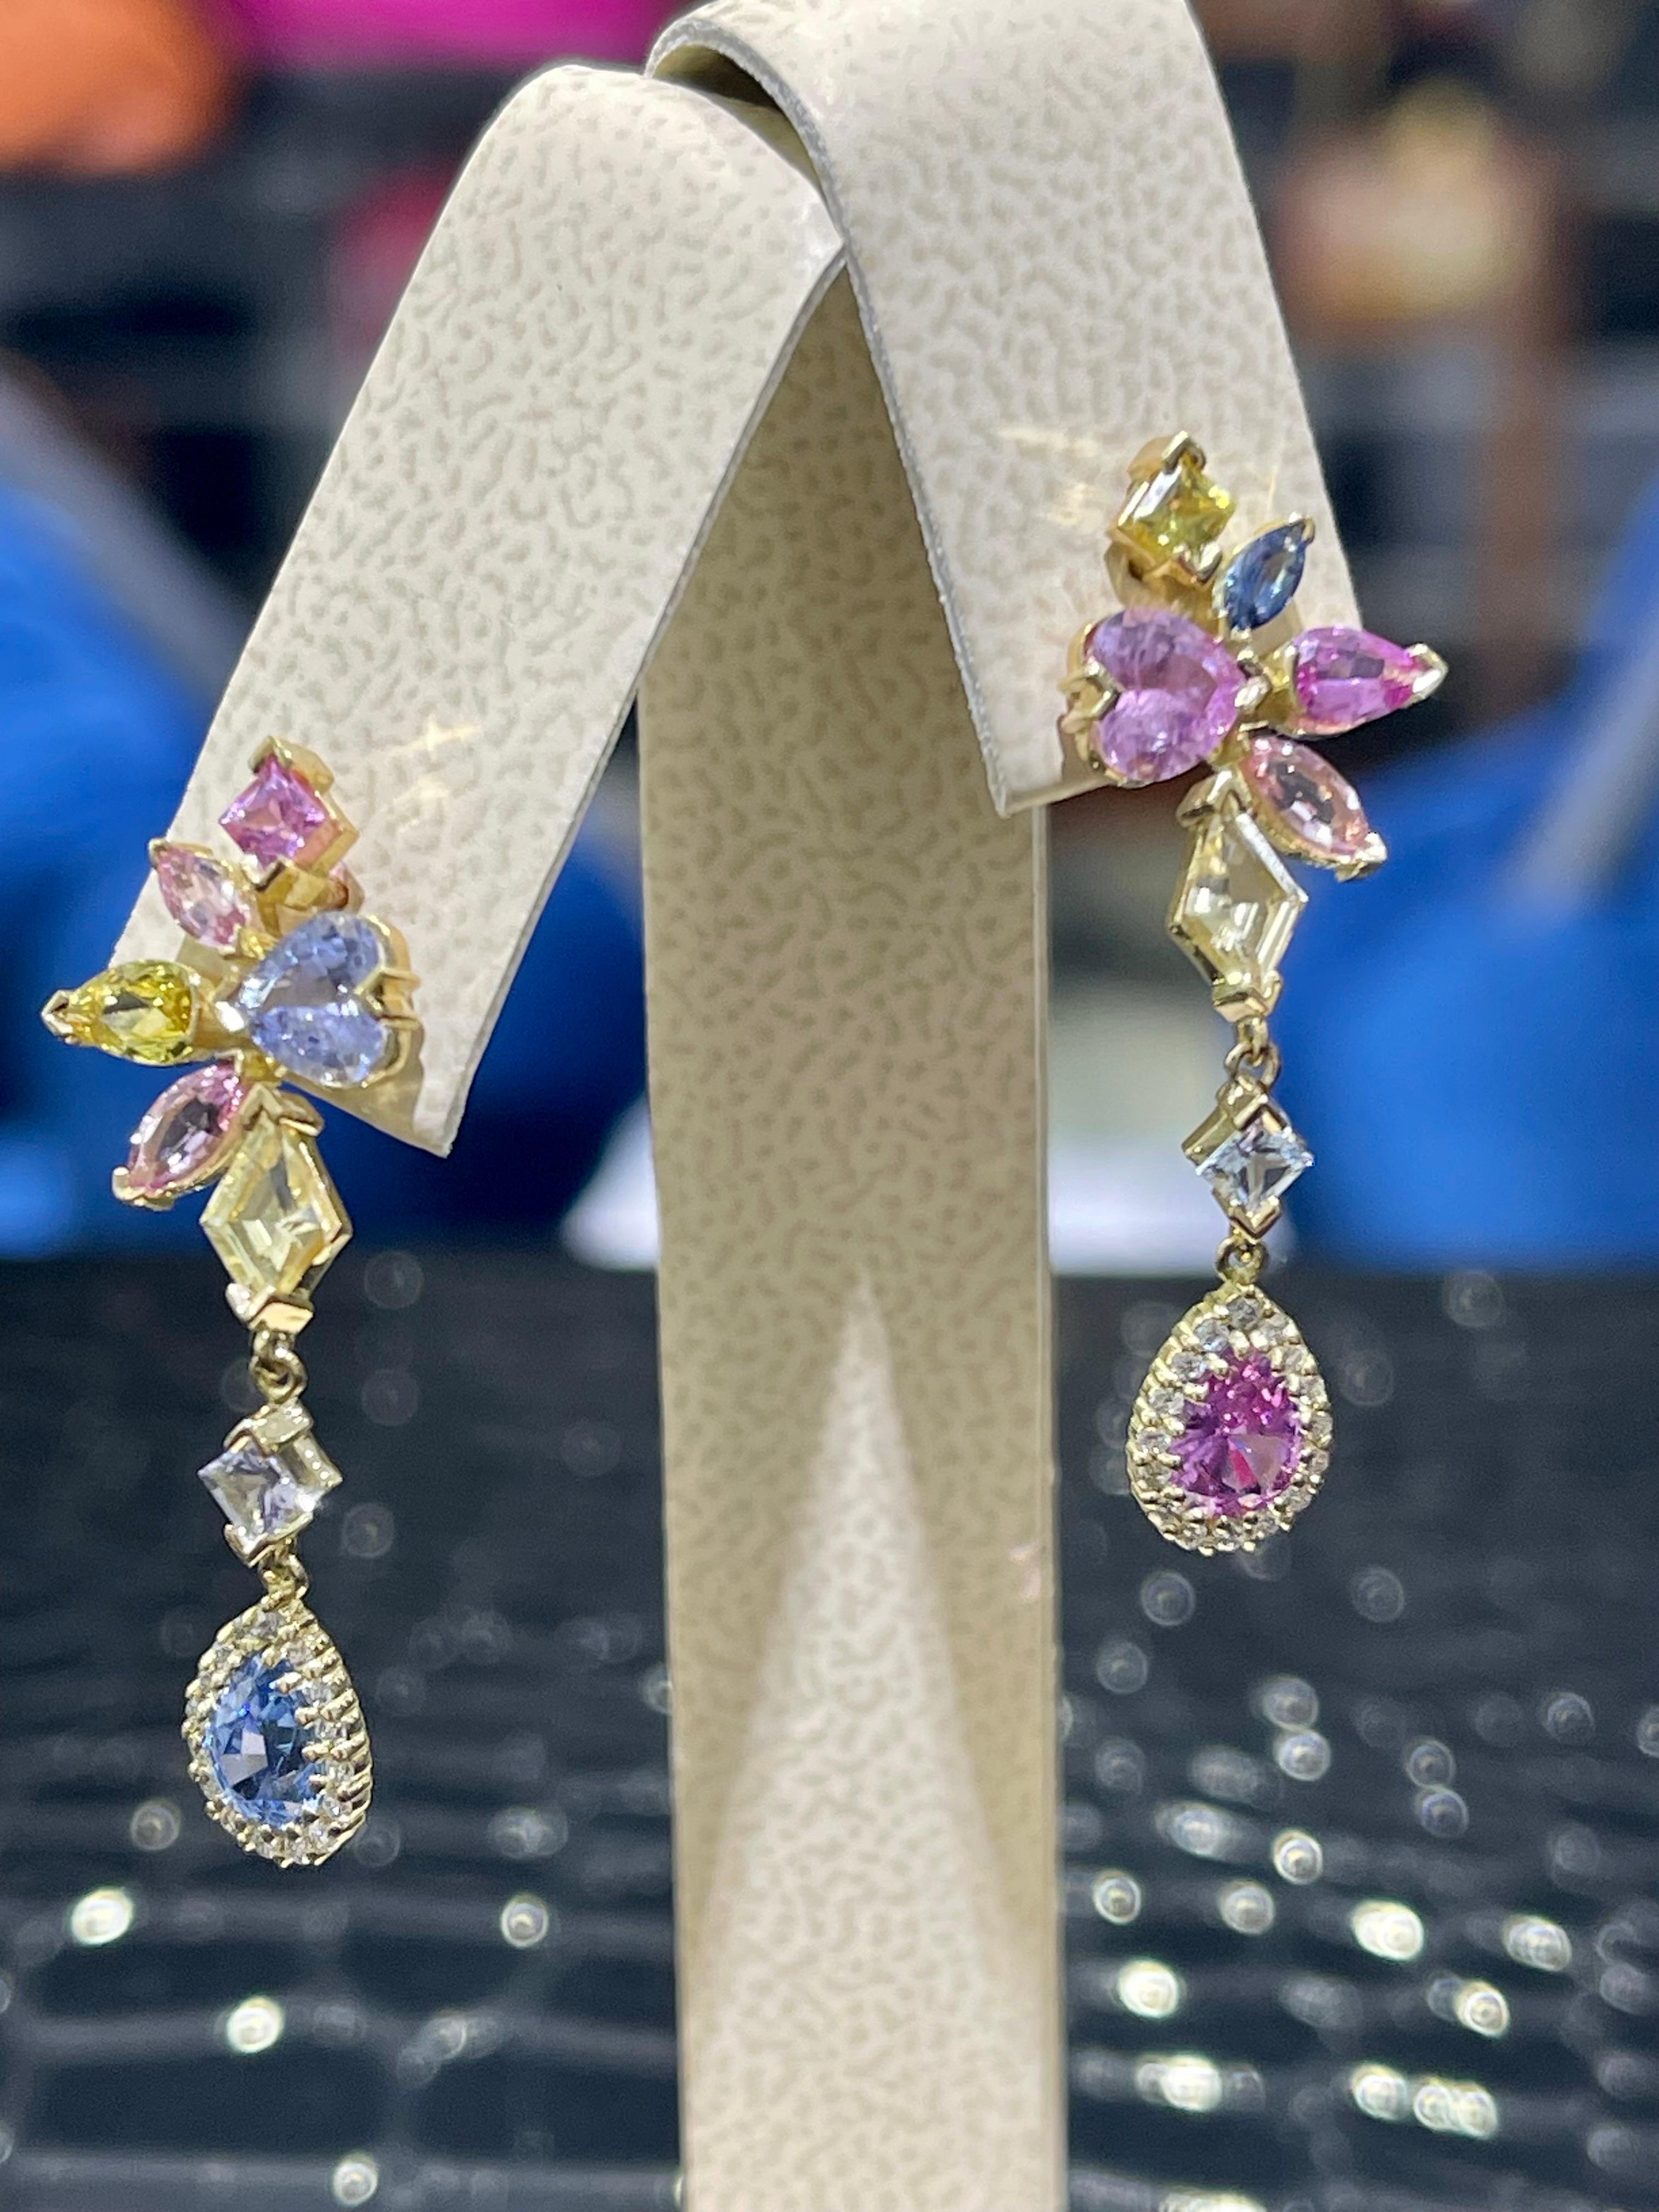 Multicolored Sapphires & Diamond earrings in 18k. 
3.93 carat total weight in blue, pink, yellow sapphires,
0.32 carat total weight in diamonds F color VS1 clarity.
Sapphires unheated, no treatment. Sri-Lanka origin.
Hanging length is 1.25”